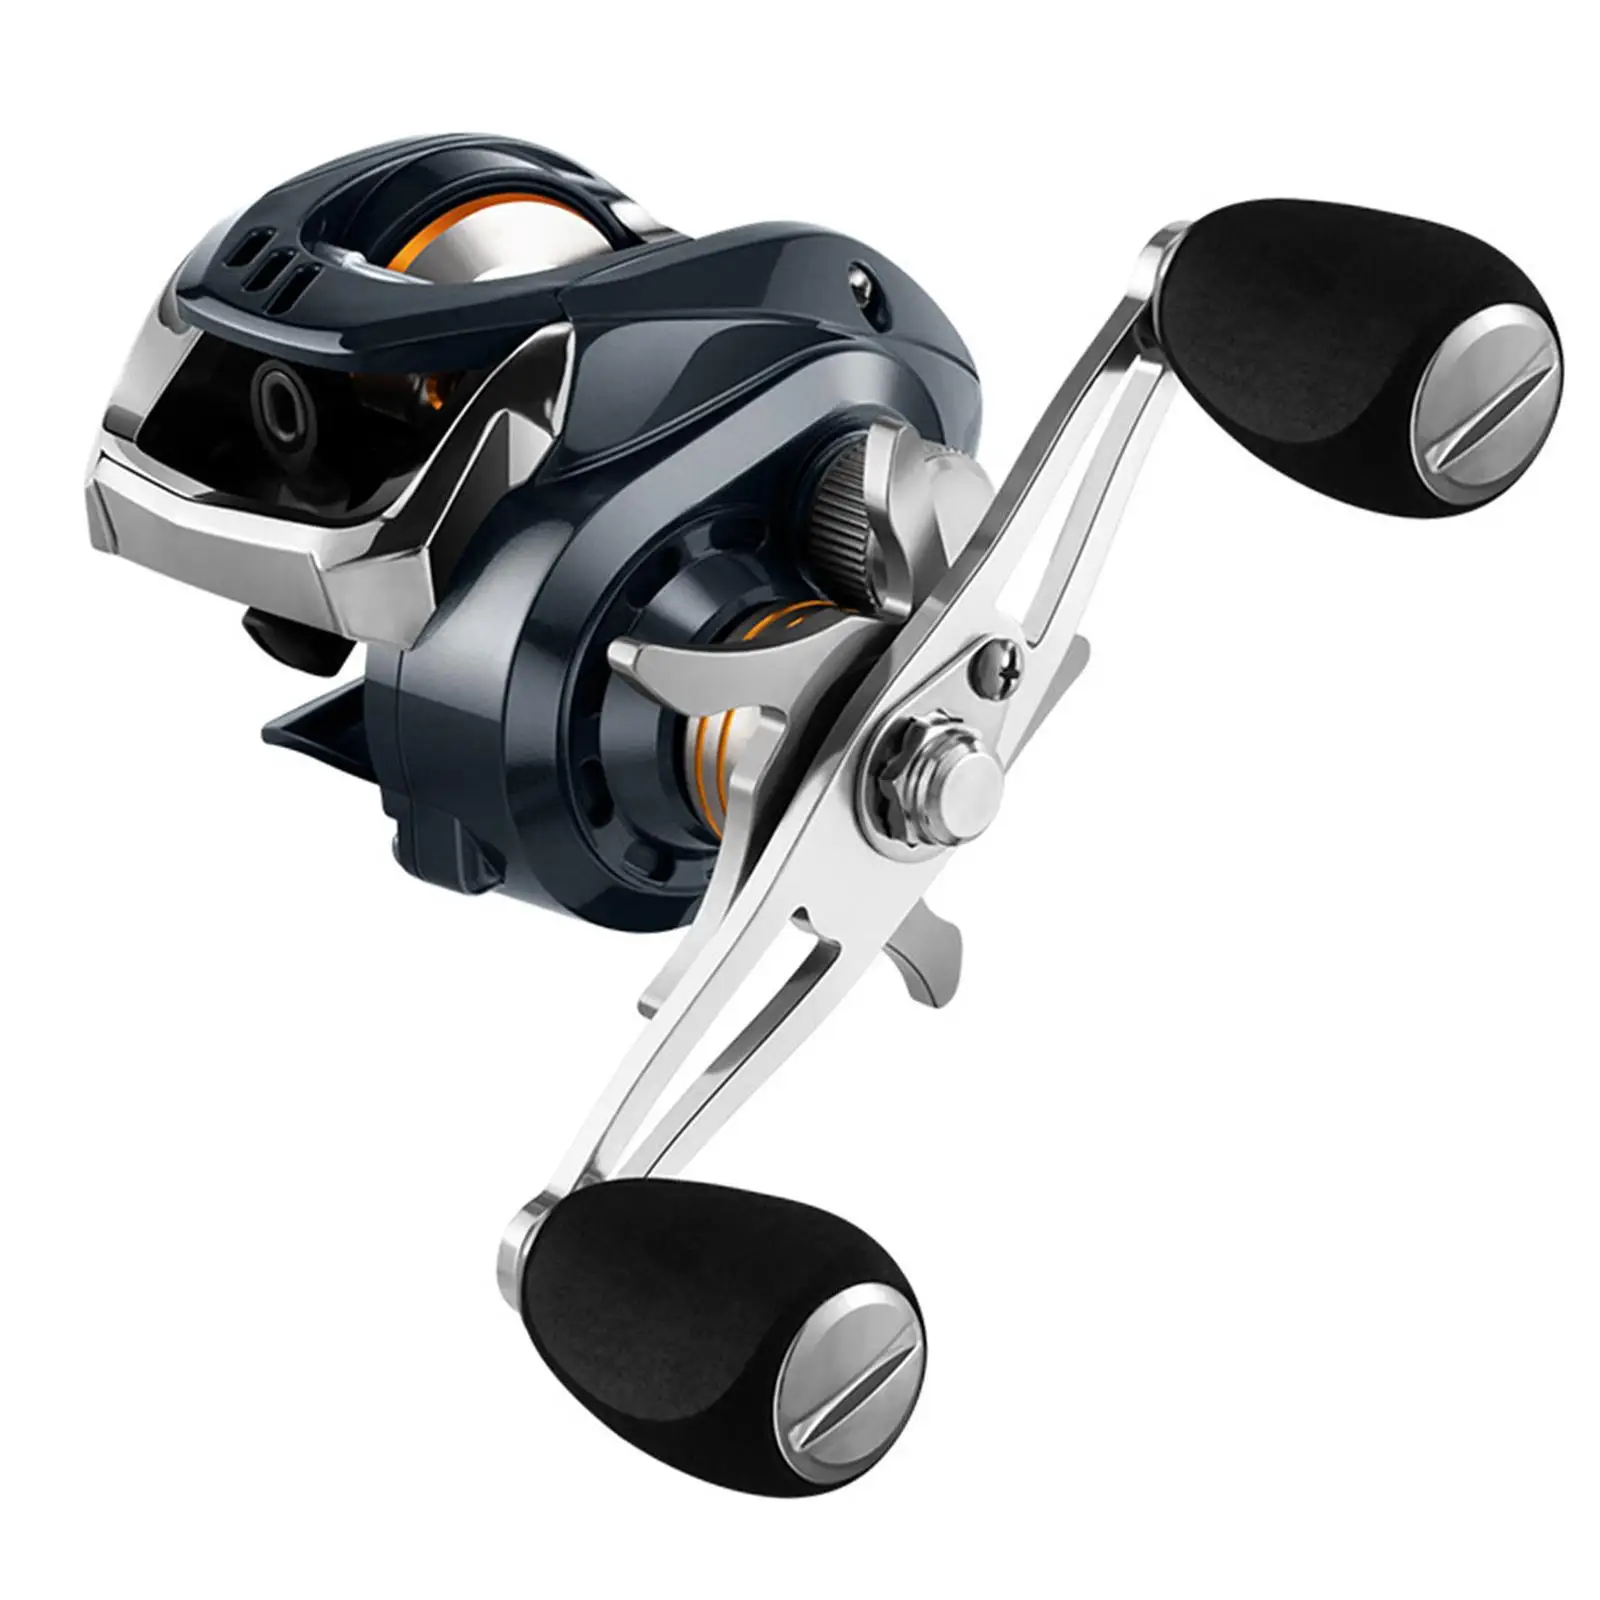 Baitcasting Reels 7.2:1 classic Baitcaster High Speed Fishing Gear for Baitcasting Carp Saltwater Trout